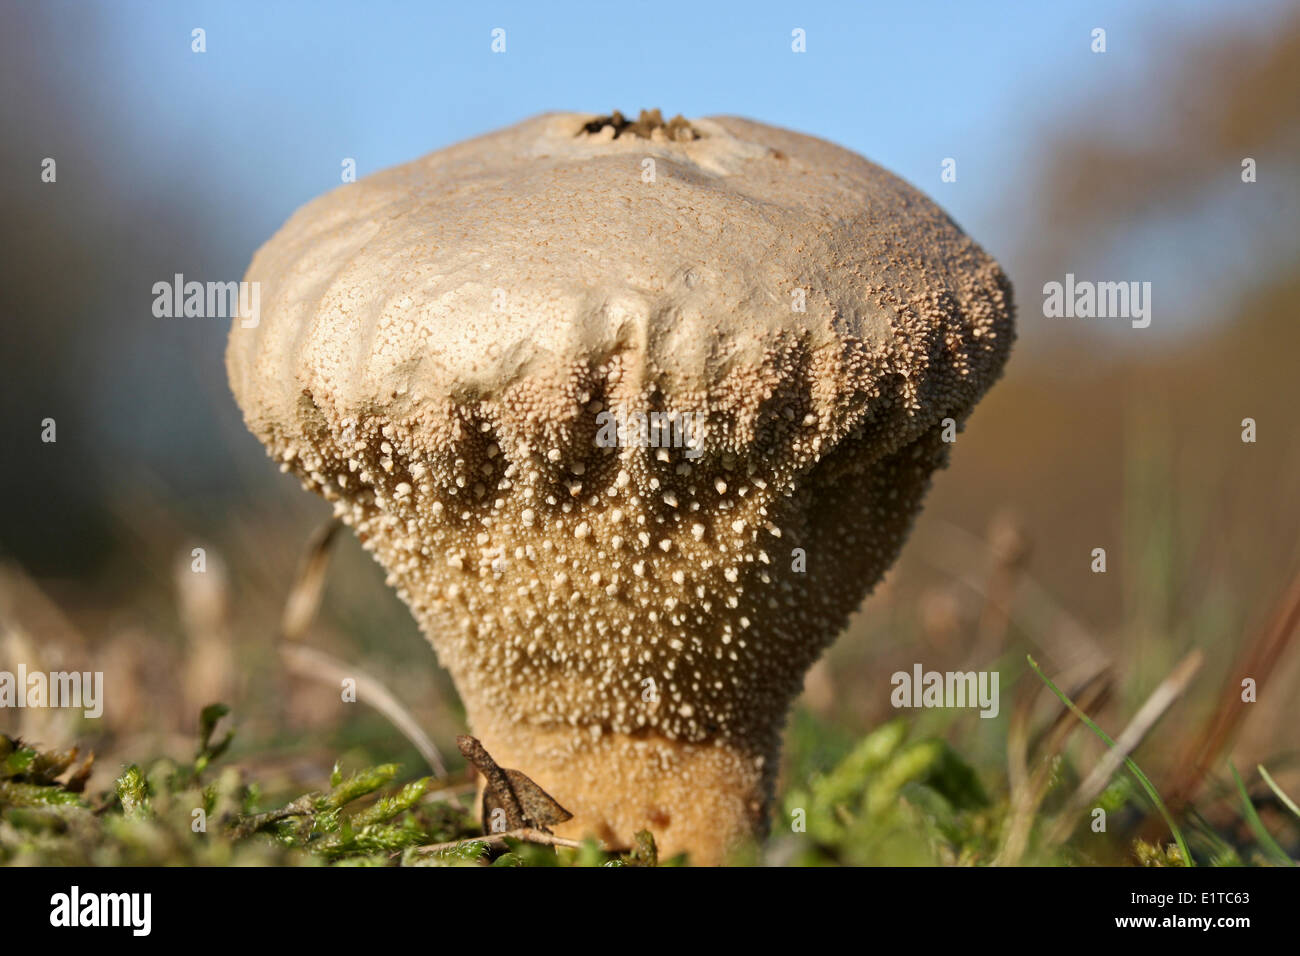 sideview of Pestle-shaped Puffball in mossfield Stock Photo